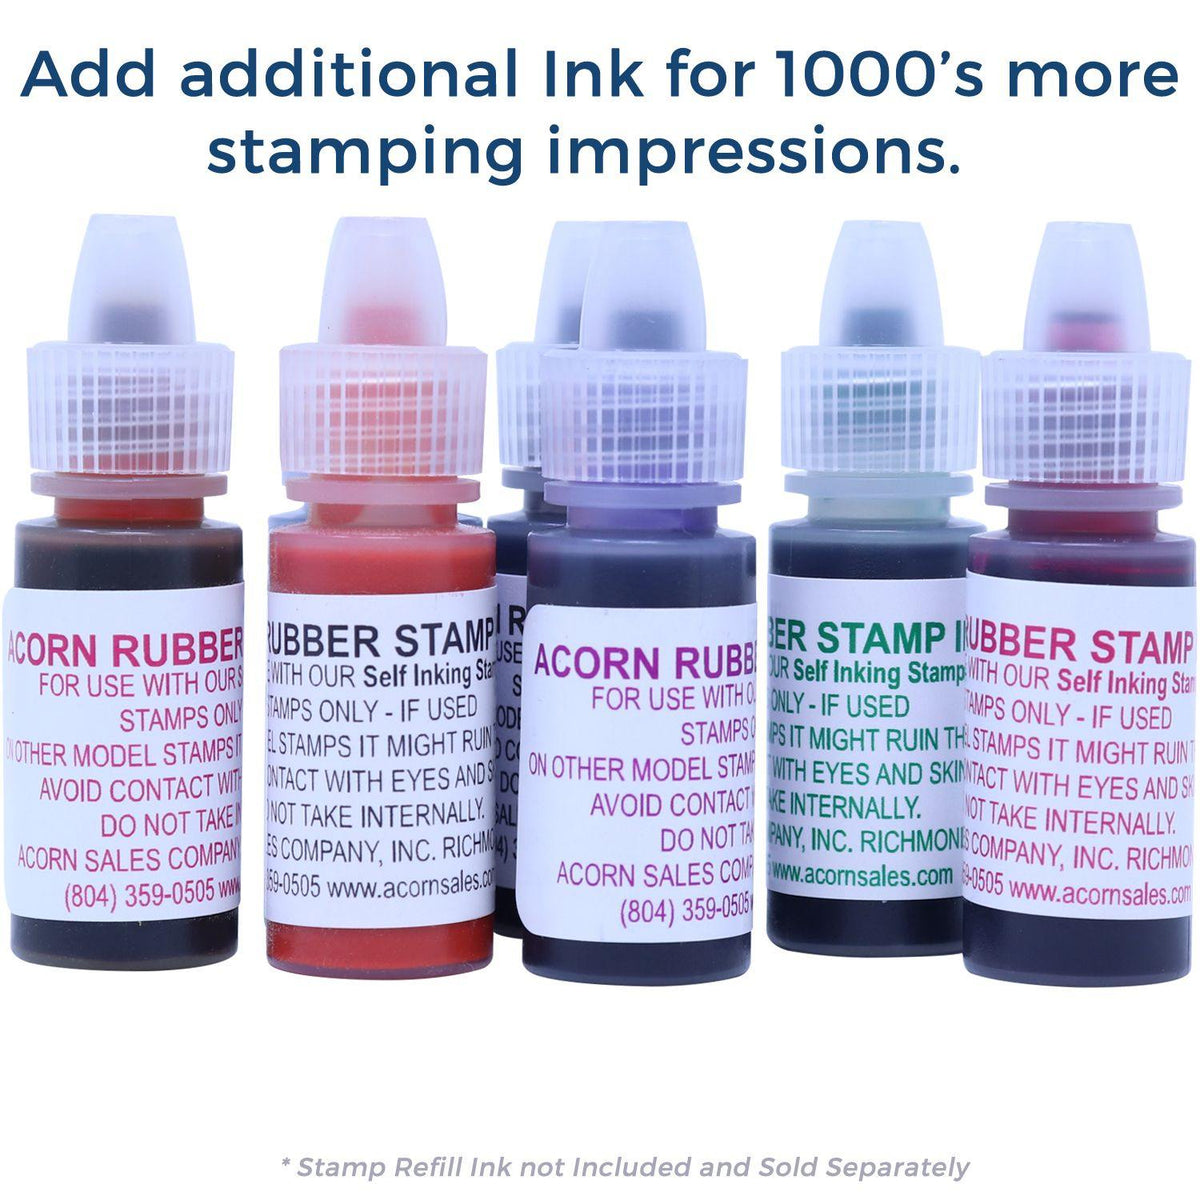 Refill Inks for Large Pre Inked Debtor Exhibit Stamp Available